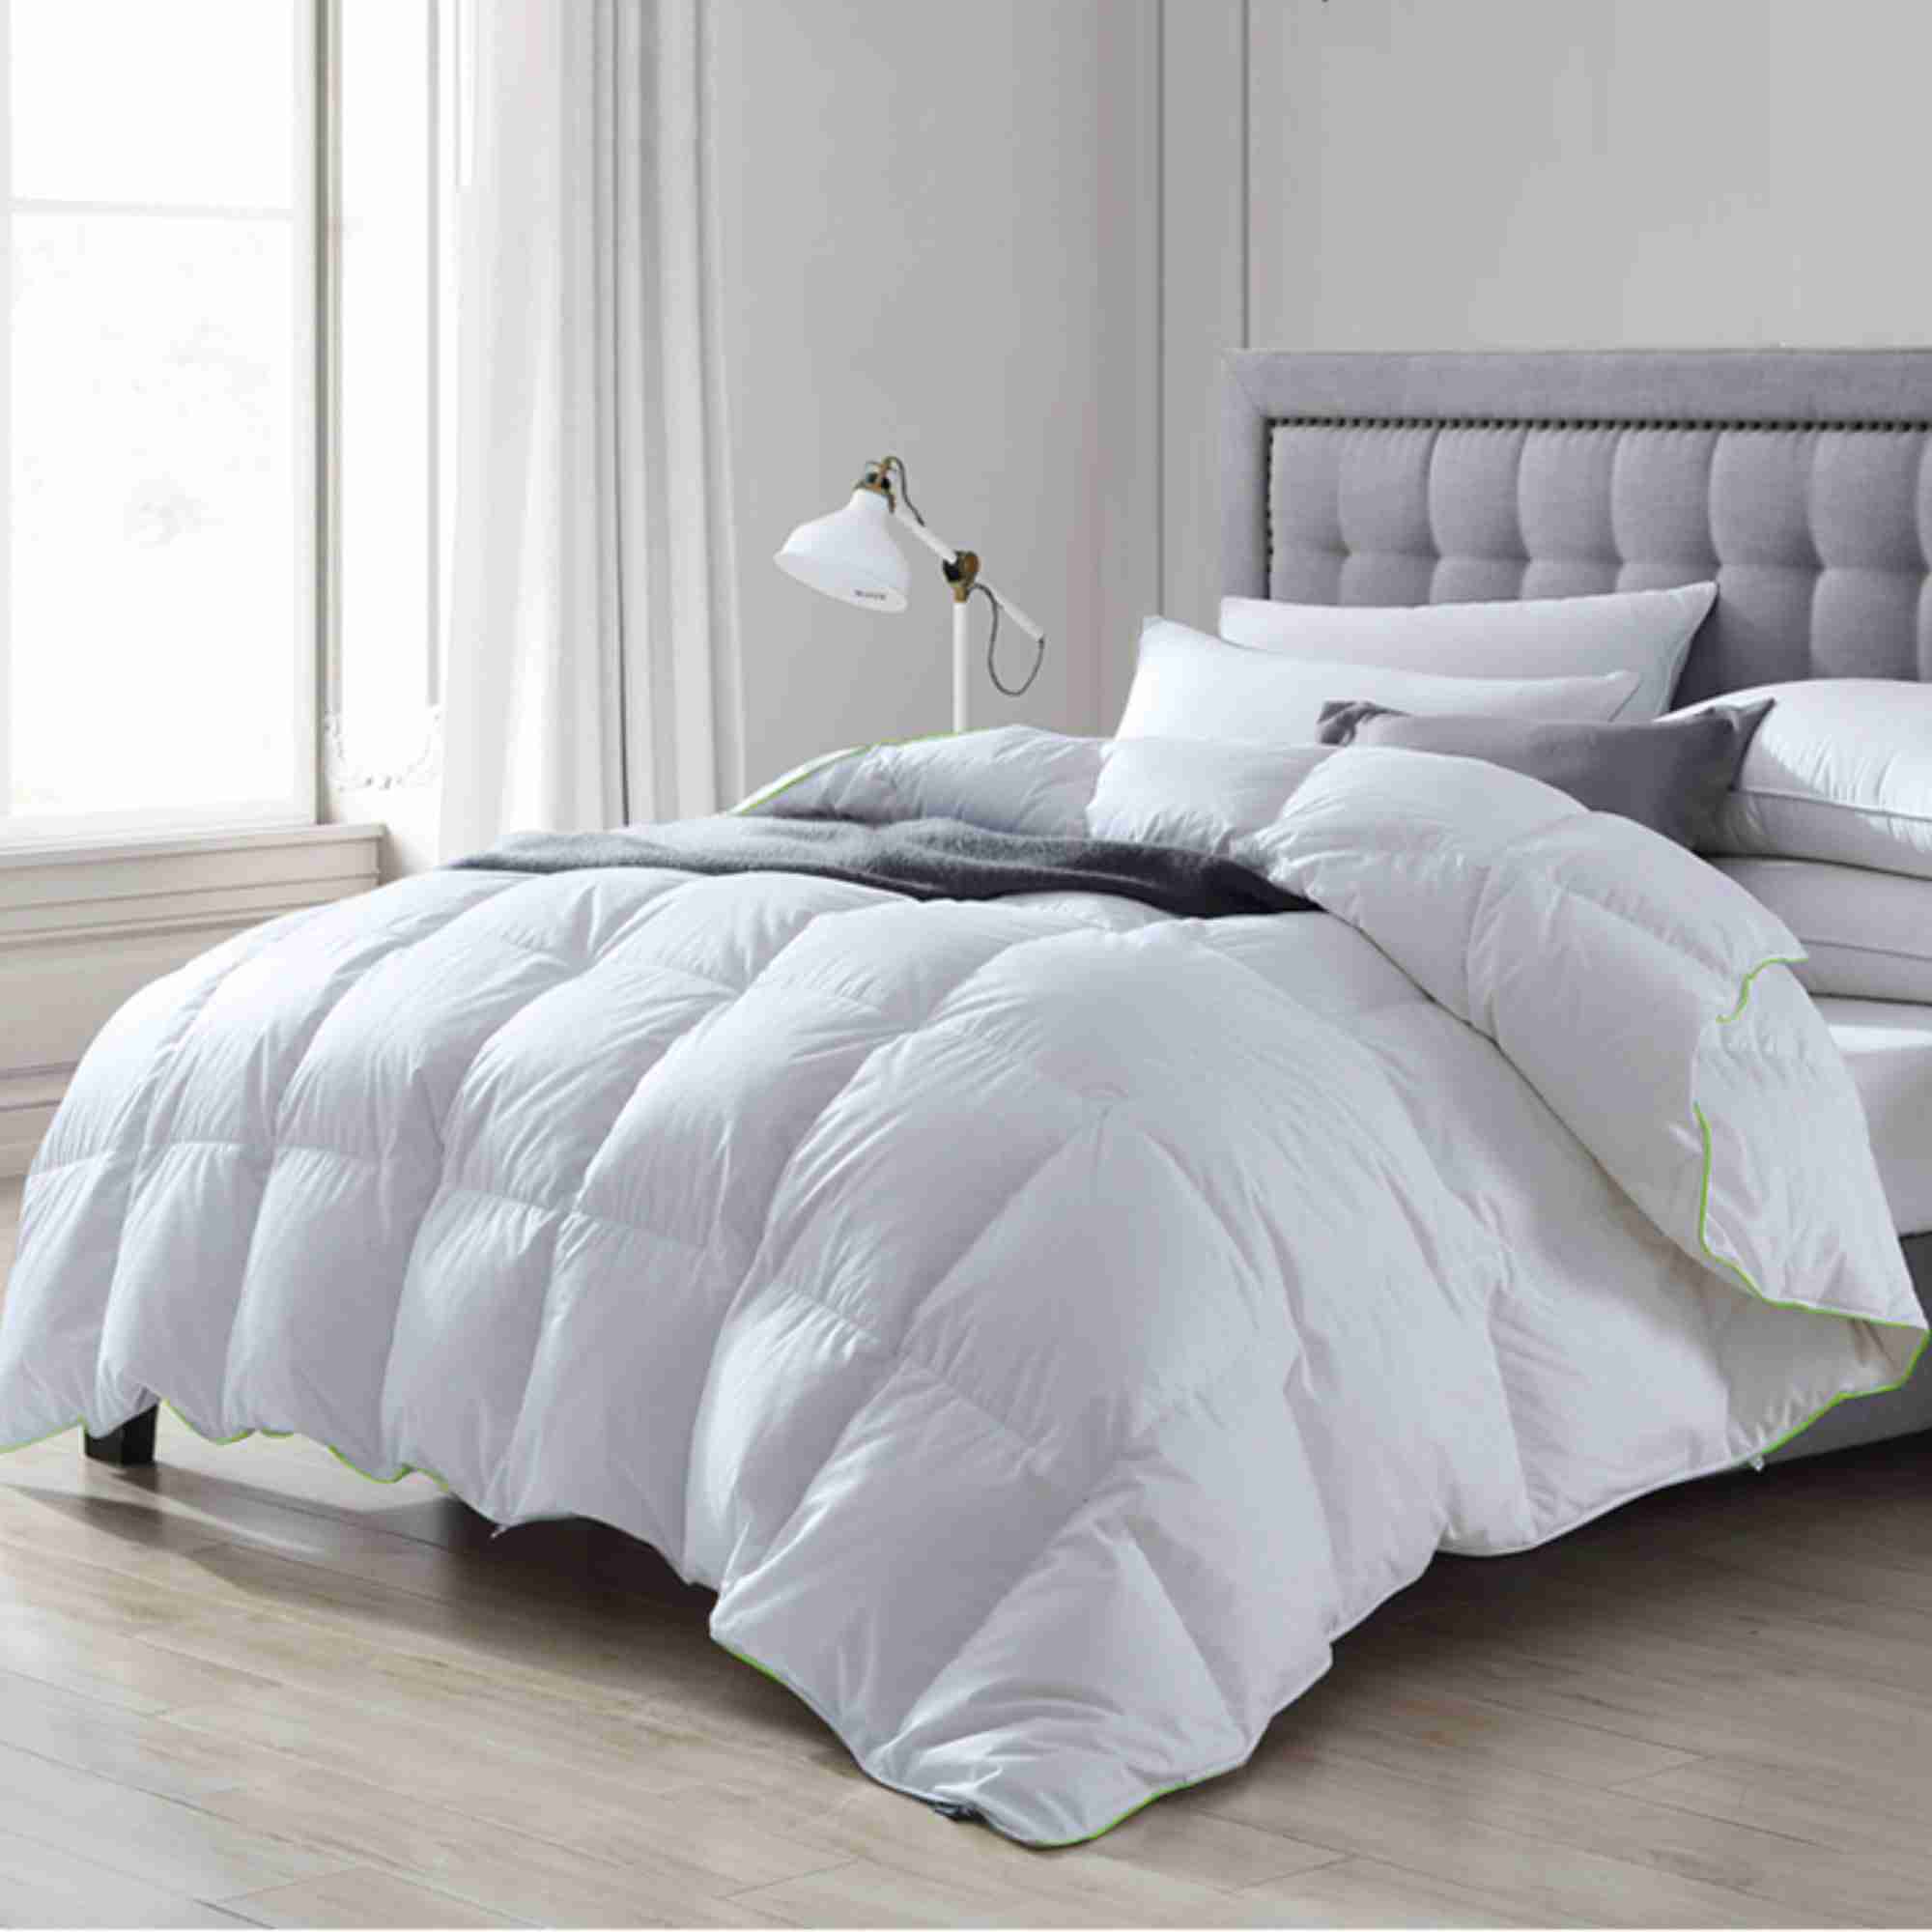 home-bedding-down-comforter with cash back rebate